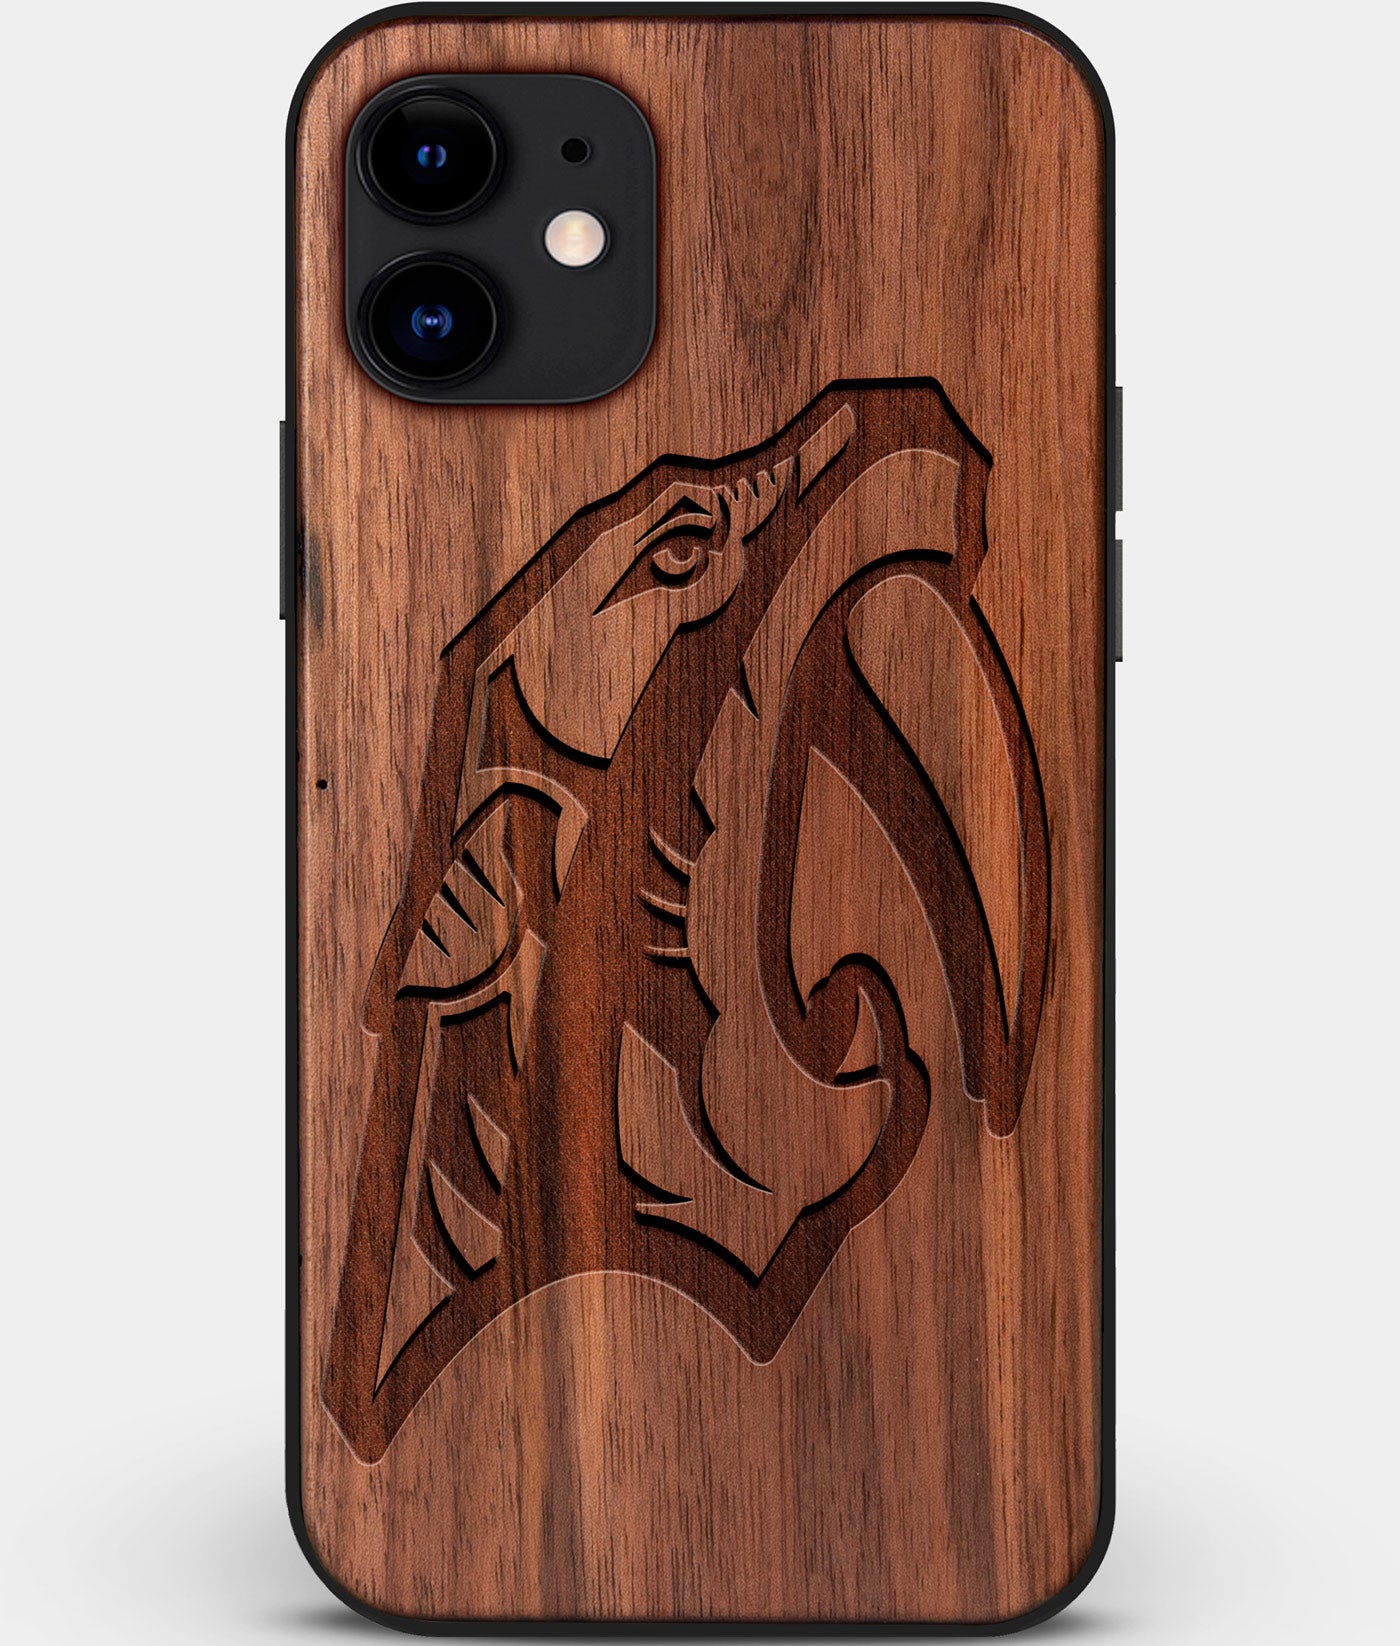 Custom Carved Wood Nashville Predators iPhone 12 Mini Case | Personalized Walnut Wood Nashville Predators Cover, Birthday Gift, Gifts For Him, Monogrammed Gift For Fan | by Engraved In Nature